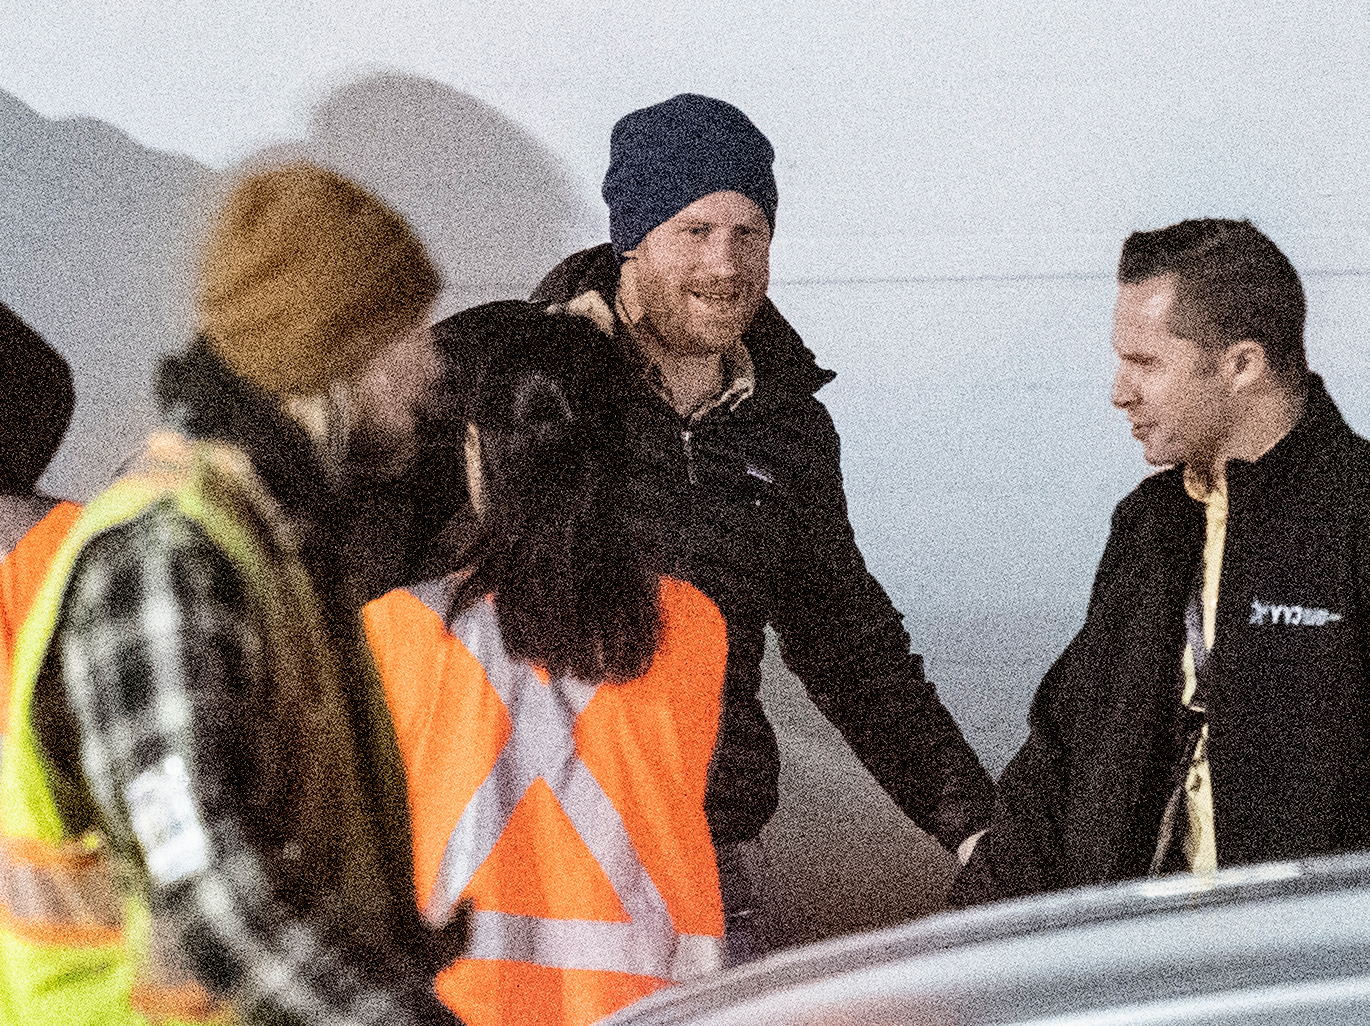 Prince-Harry-Arrives-in-Canada-to-Begin-a-New-Chapter-With-Meghan-Markle-and-Son-Archie